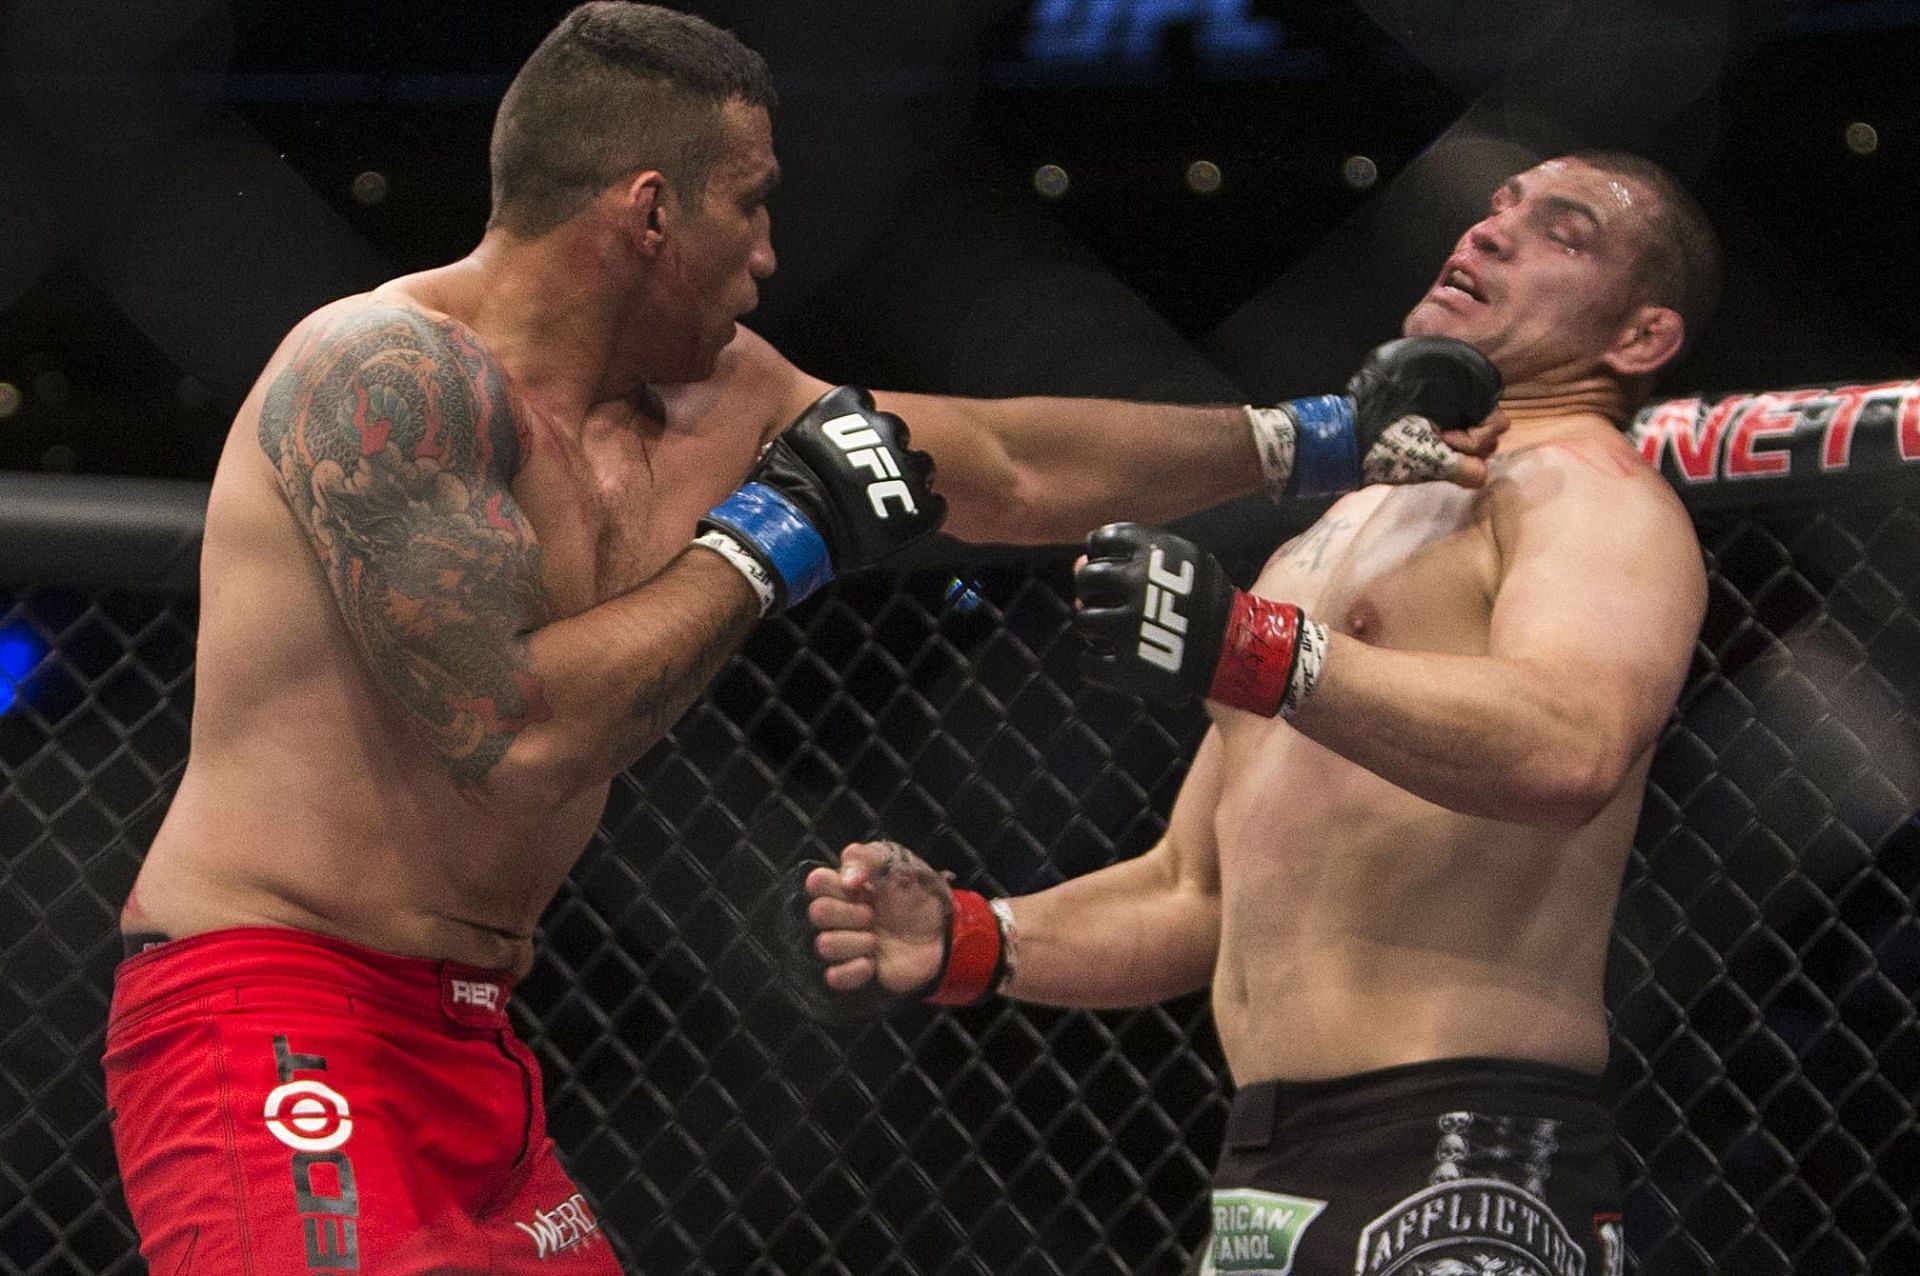 A rematch between Cain Velasquez and Fabricio Werdum fell through more than once